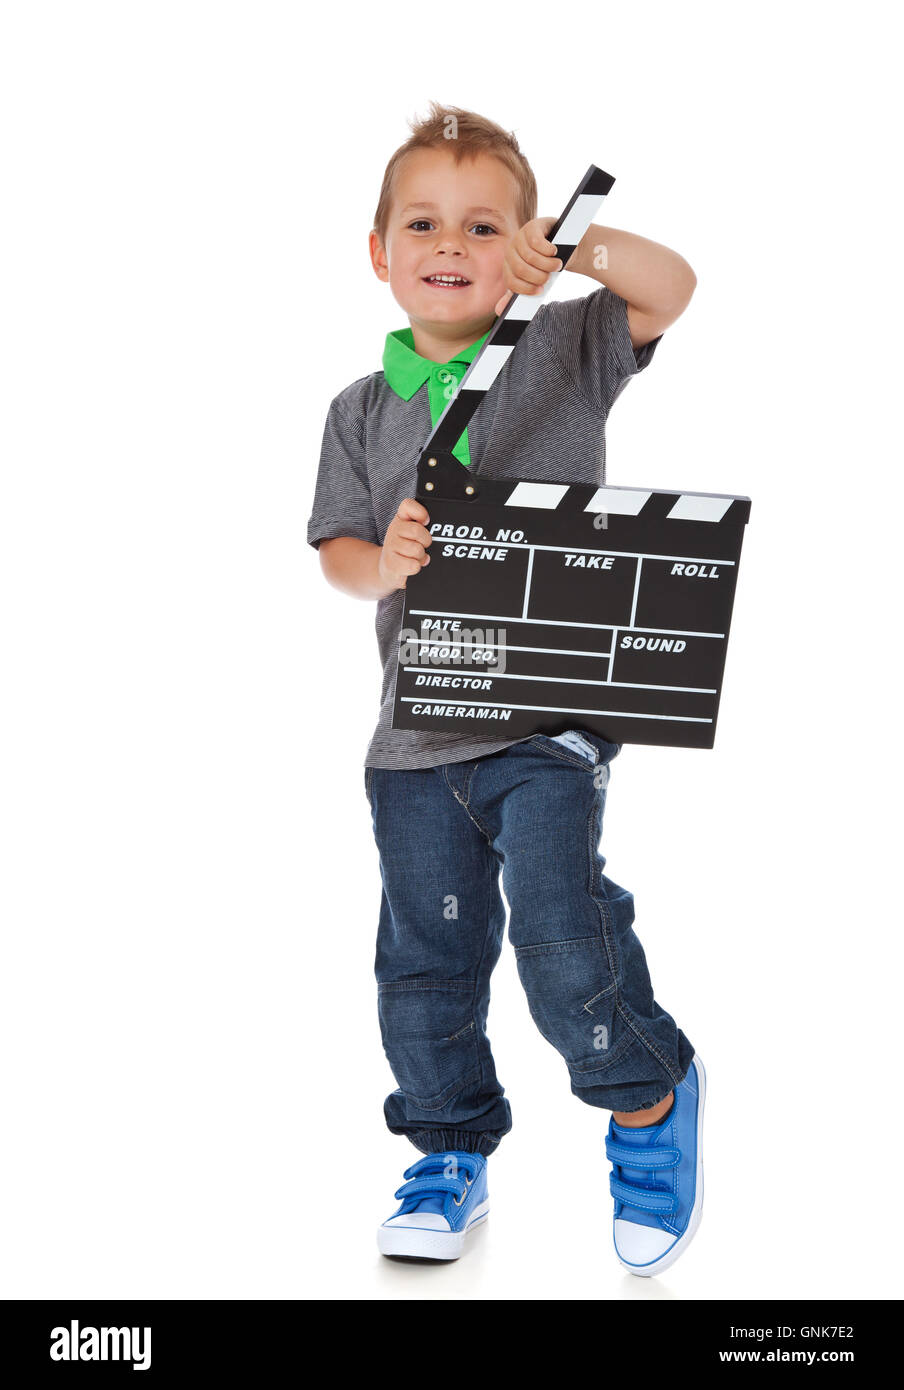 Boy holding clapperboard Stock Photo